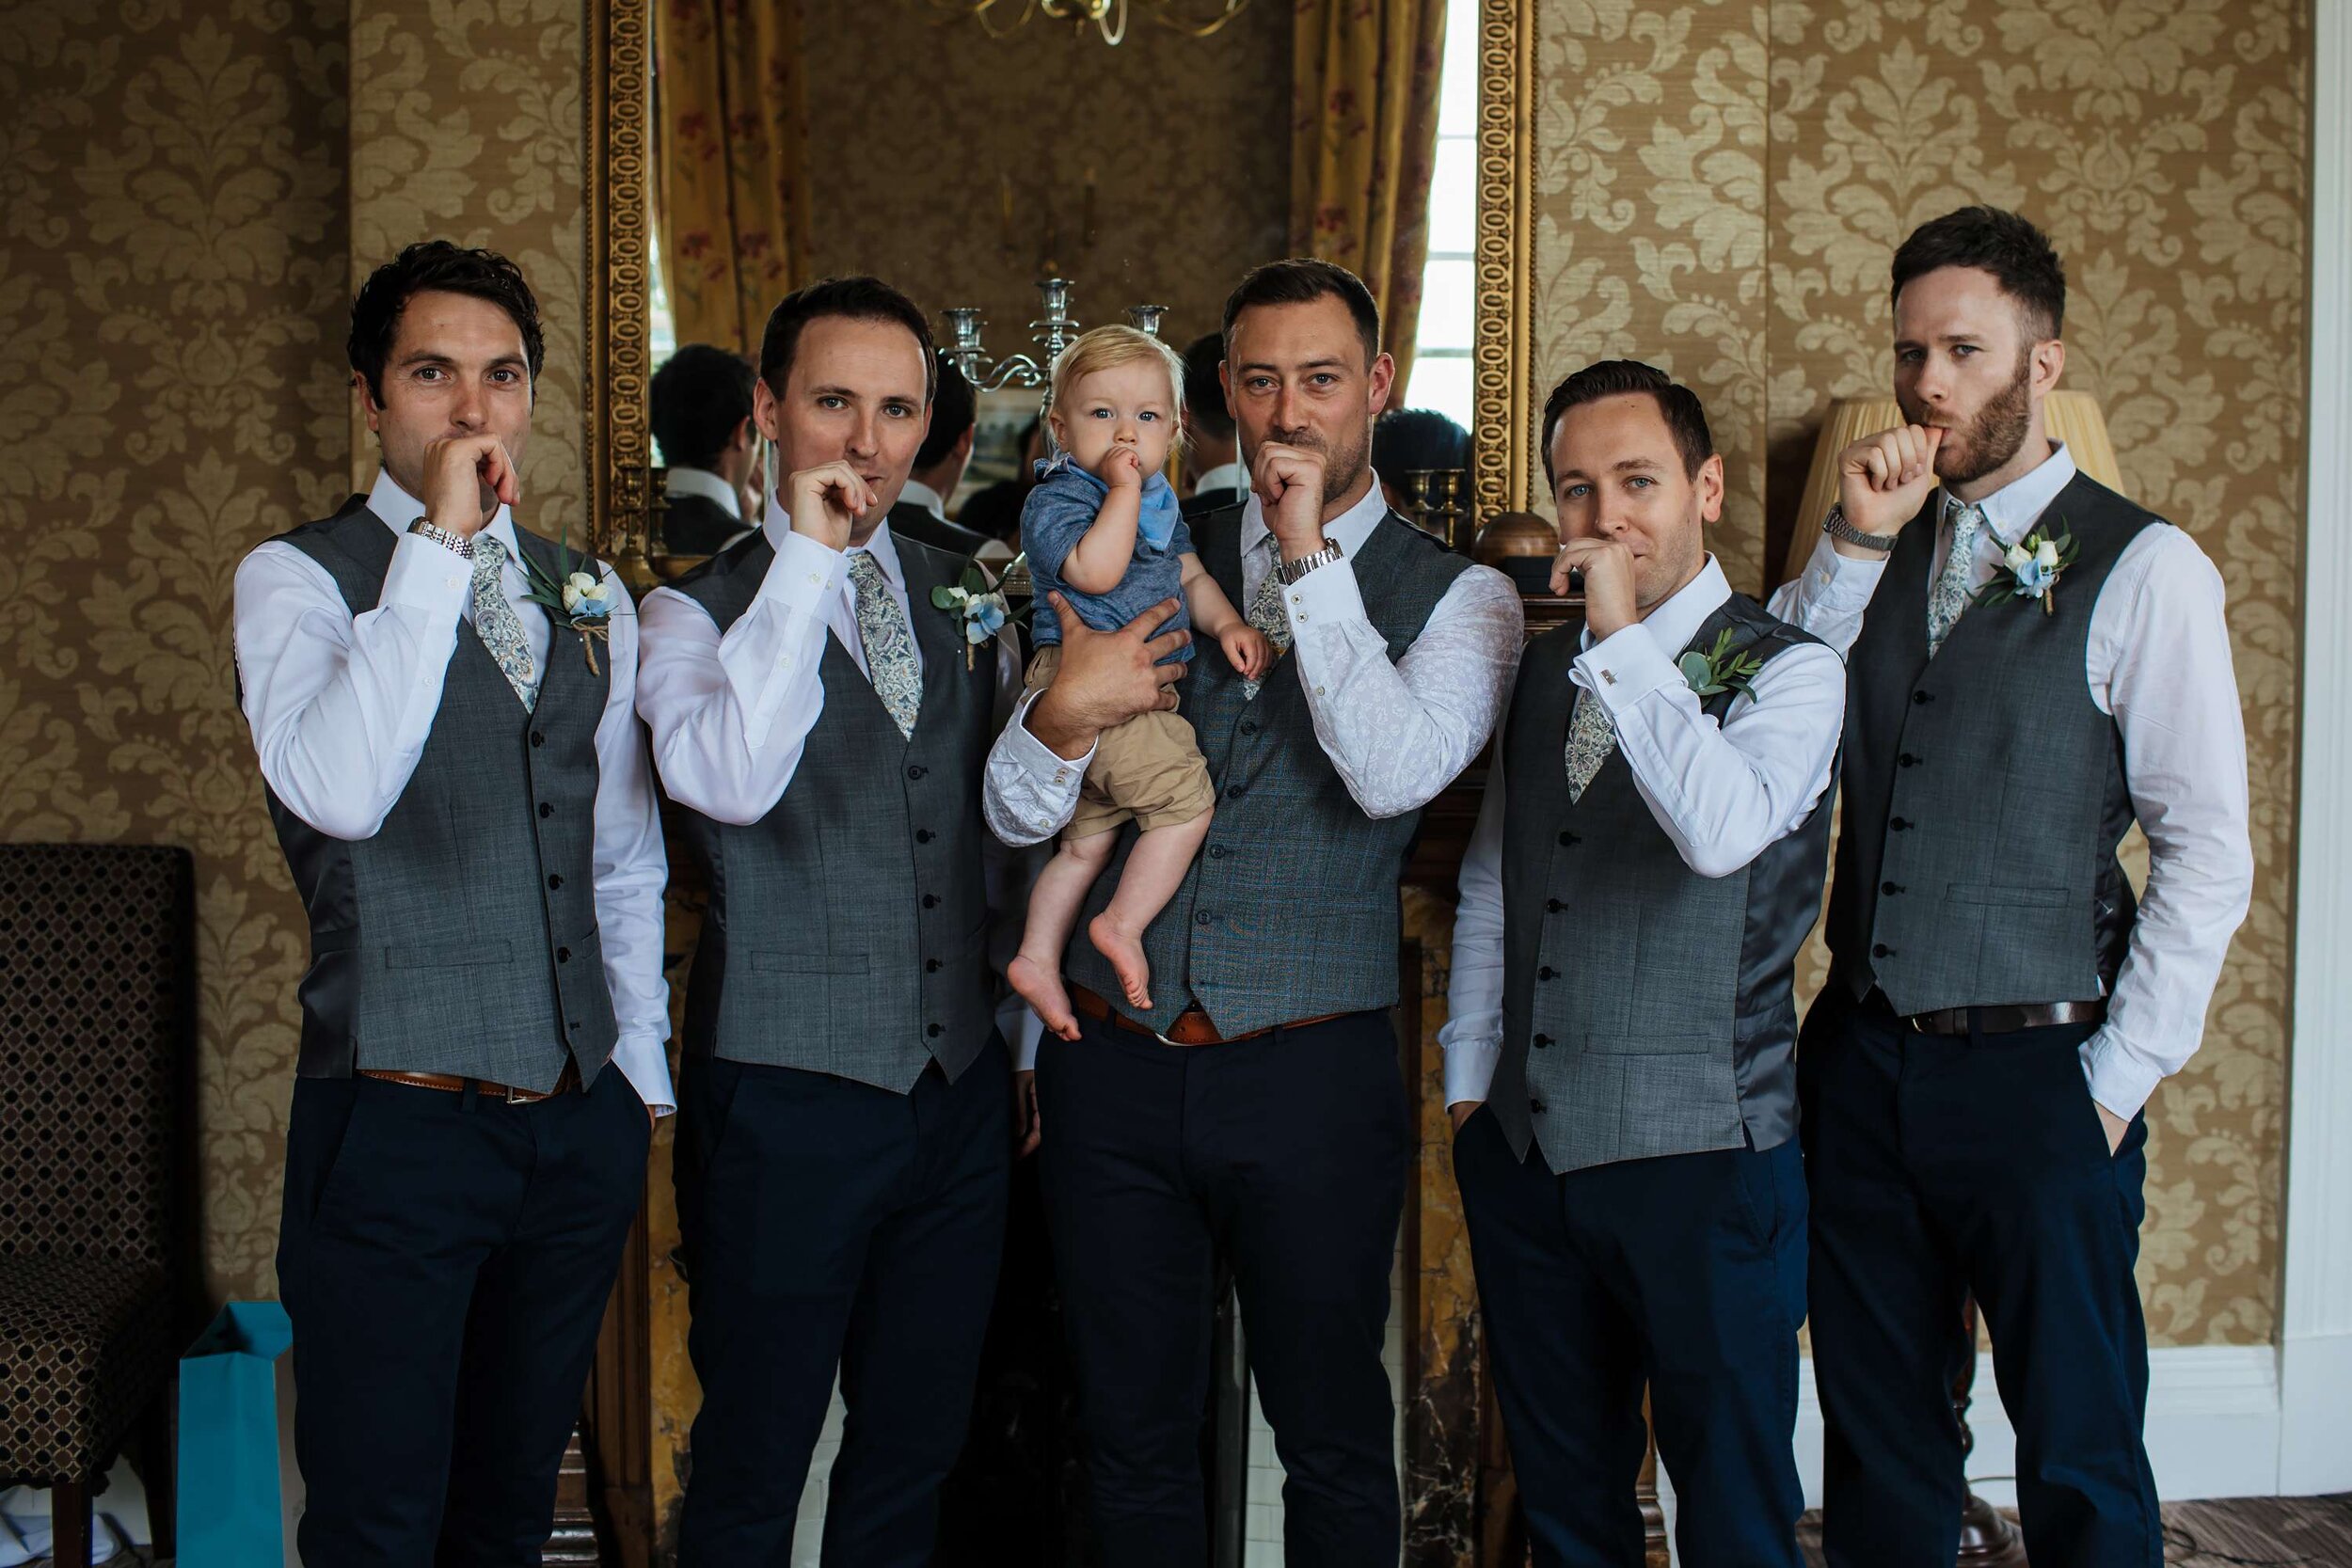 Groomsmen sucking their thumbs with young boy for a photo